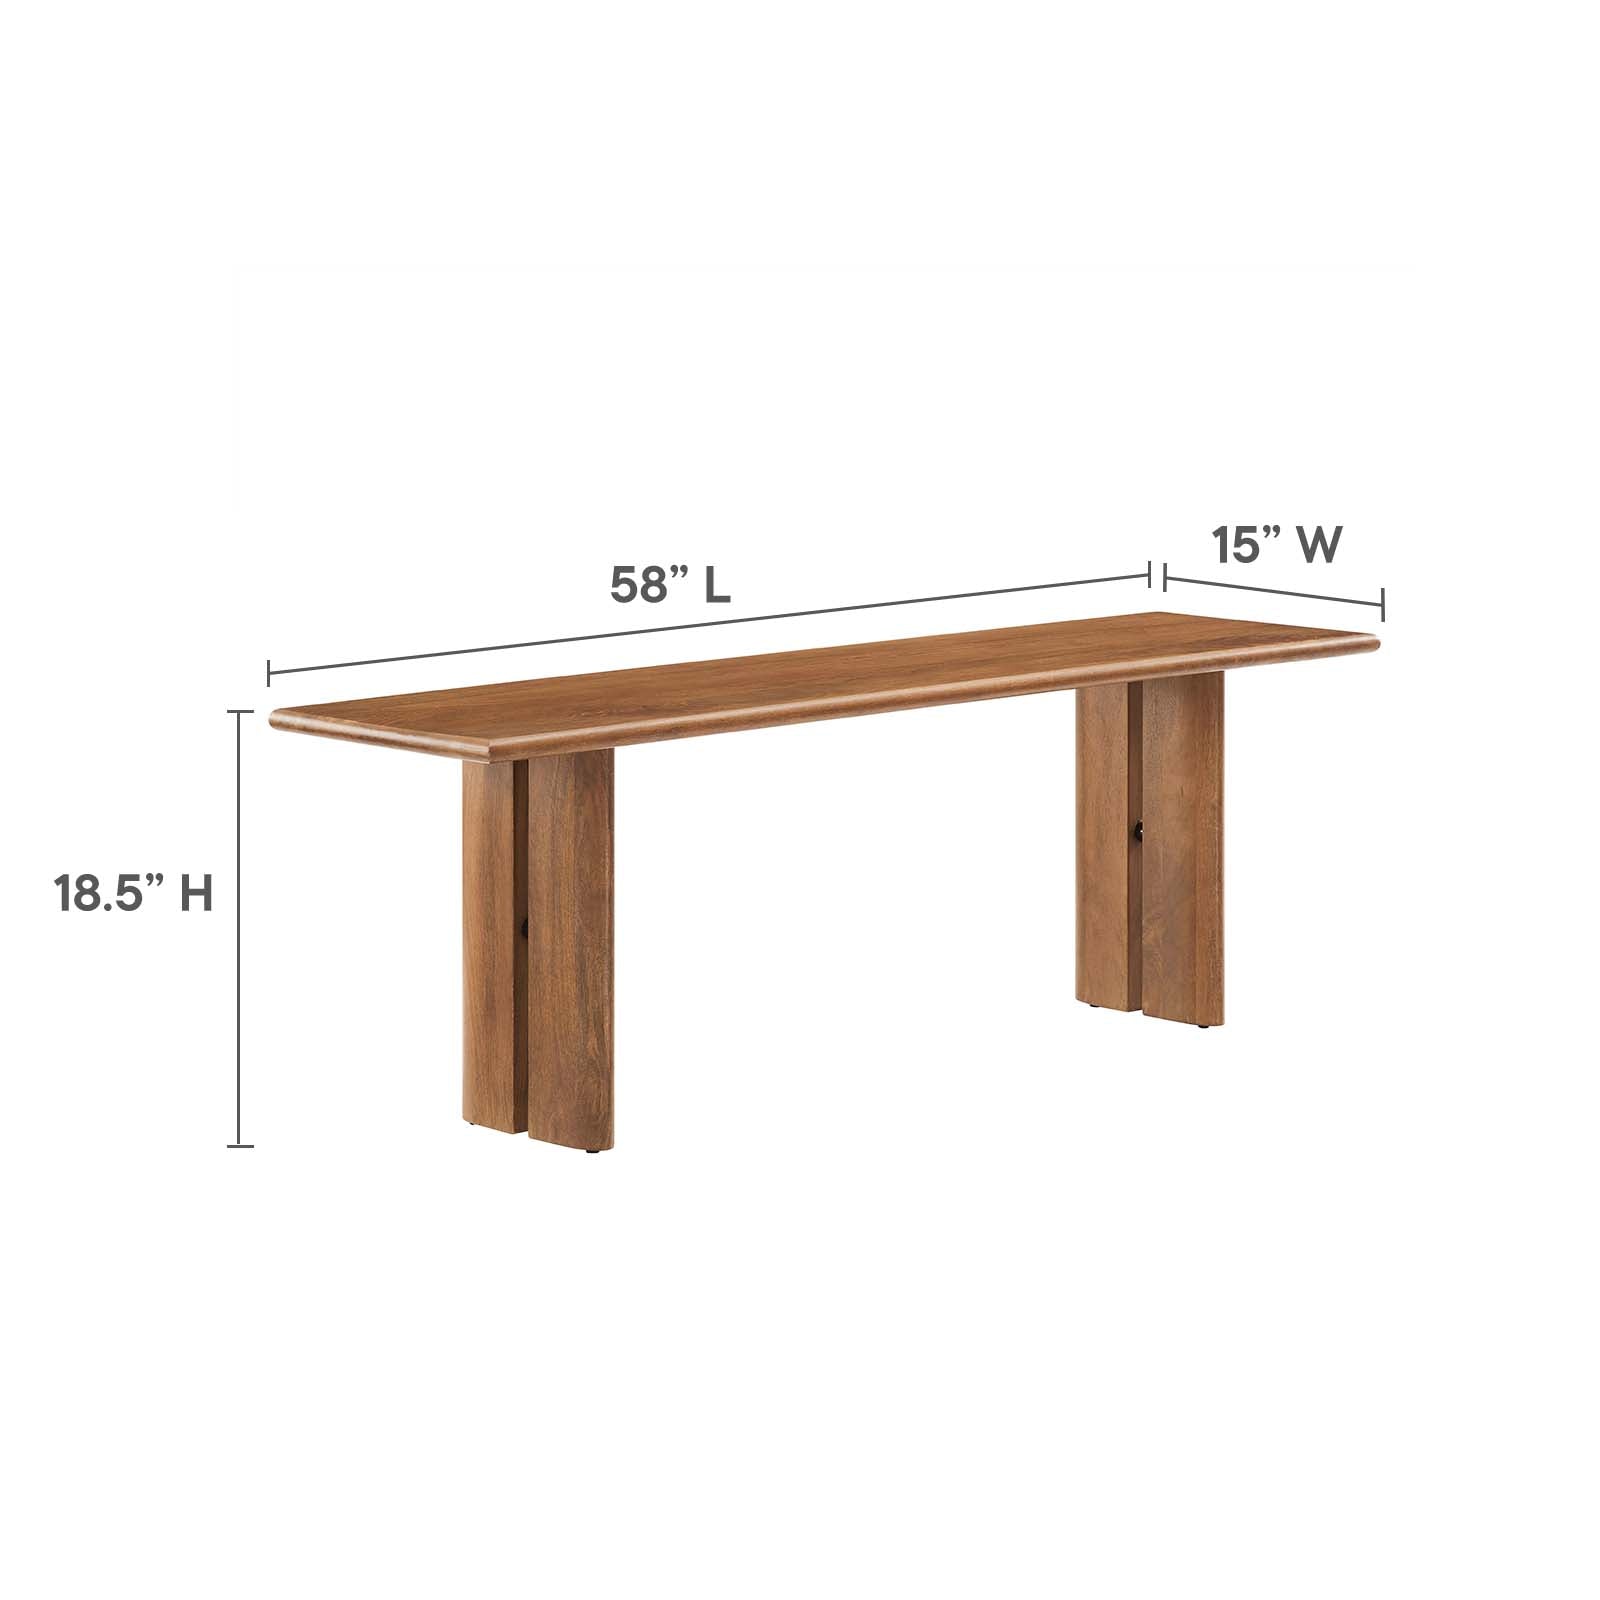 Amistad 72" Wood Dining Table and Bench Set - East Shore Modern Home Furnishings